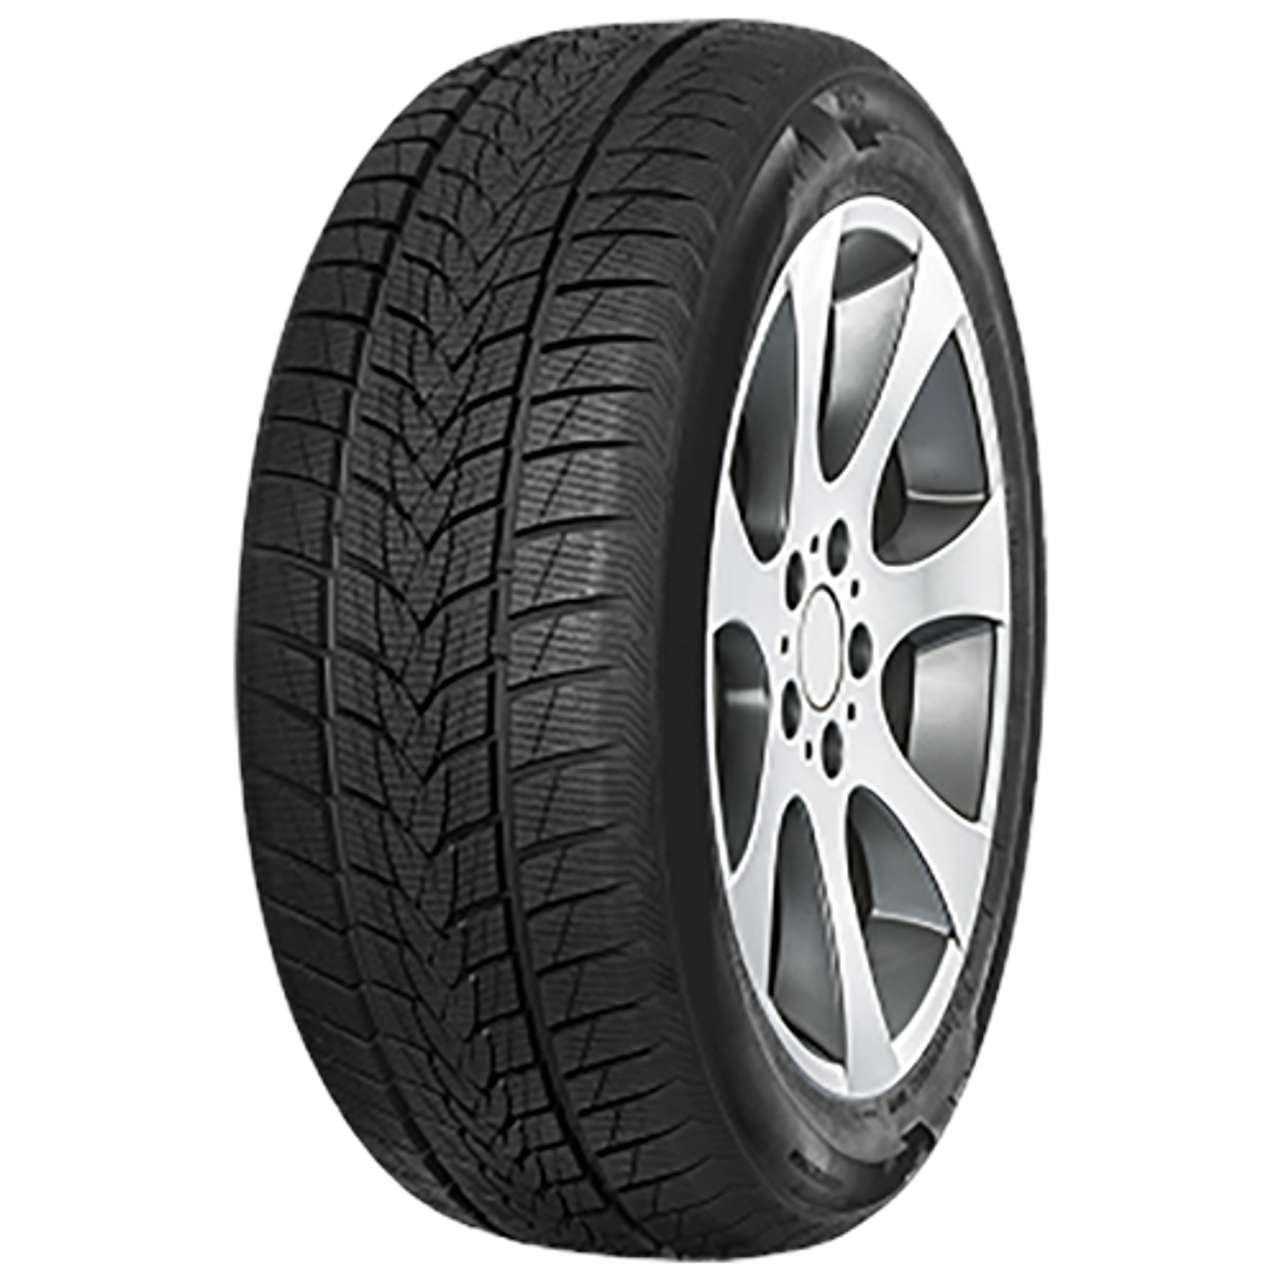 IMPERIAL SNOWDRAGON UHP 235/55R20 105V BSW